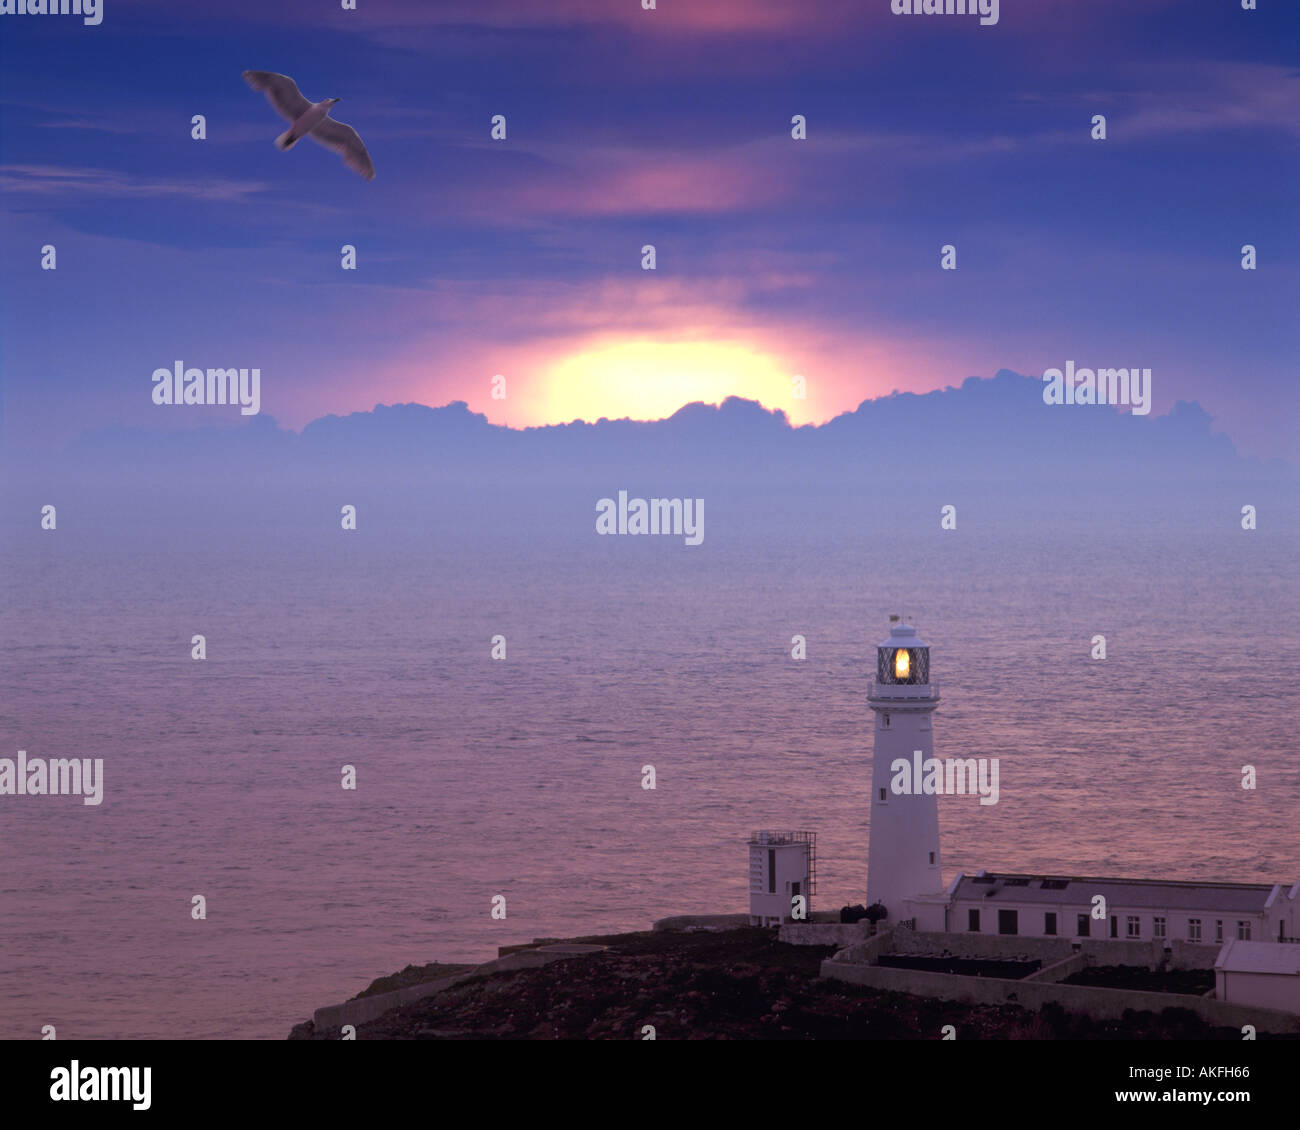 GB - WALES: Sonnenuntergang über South Stack Leuchtturm auf Anglesey Stockfoto